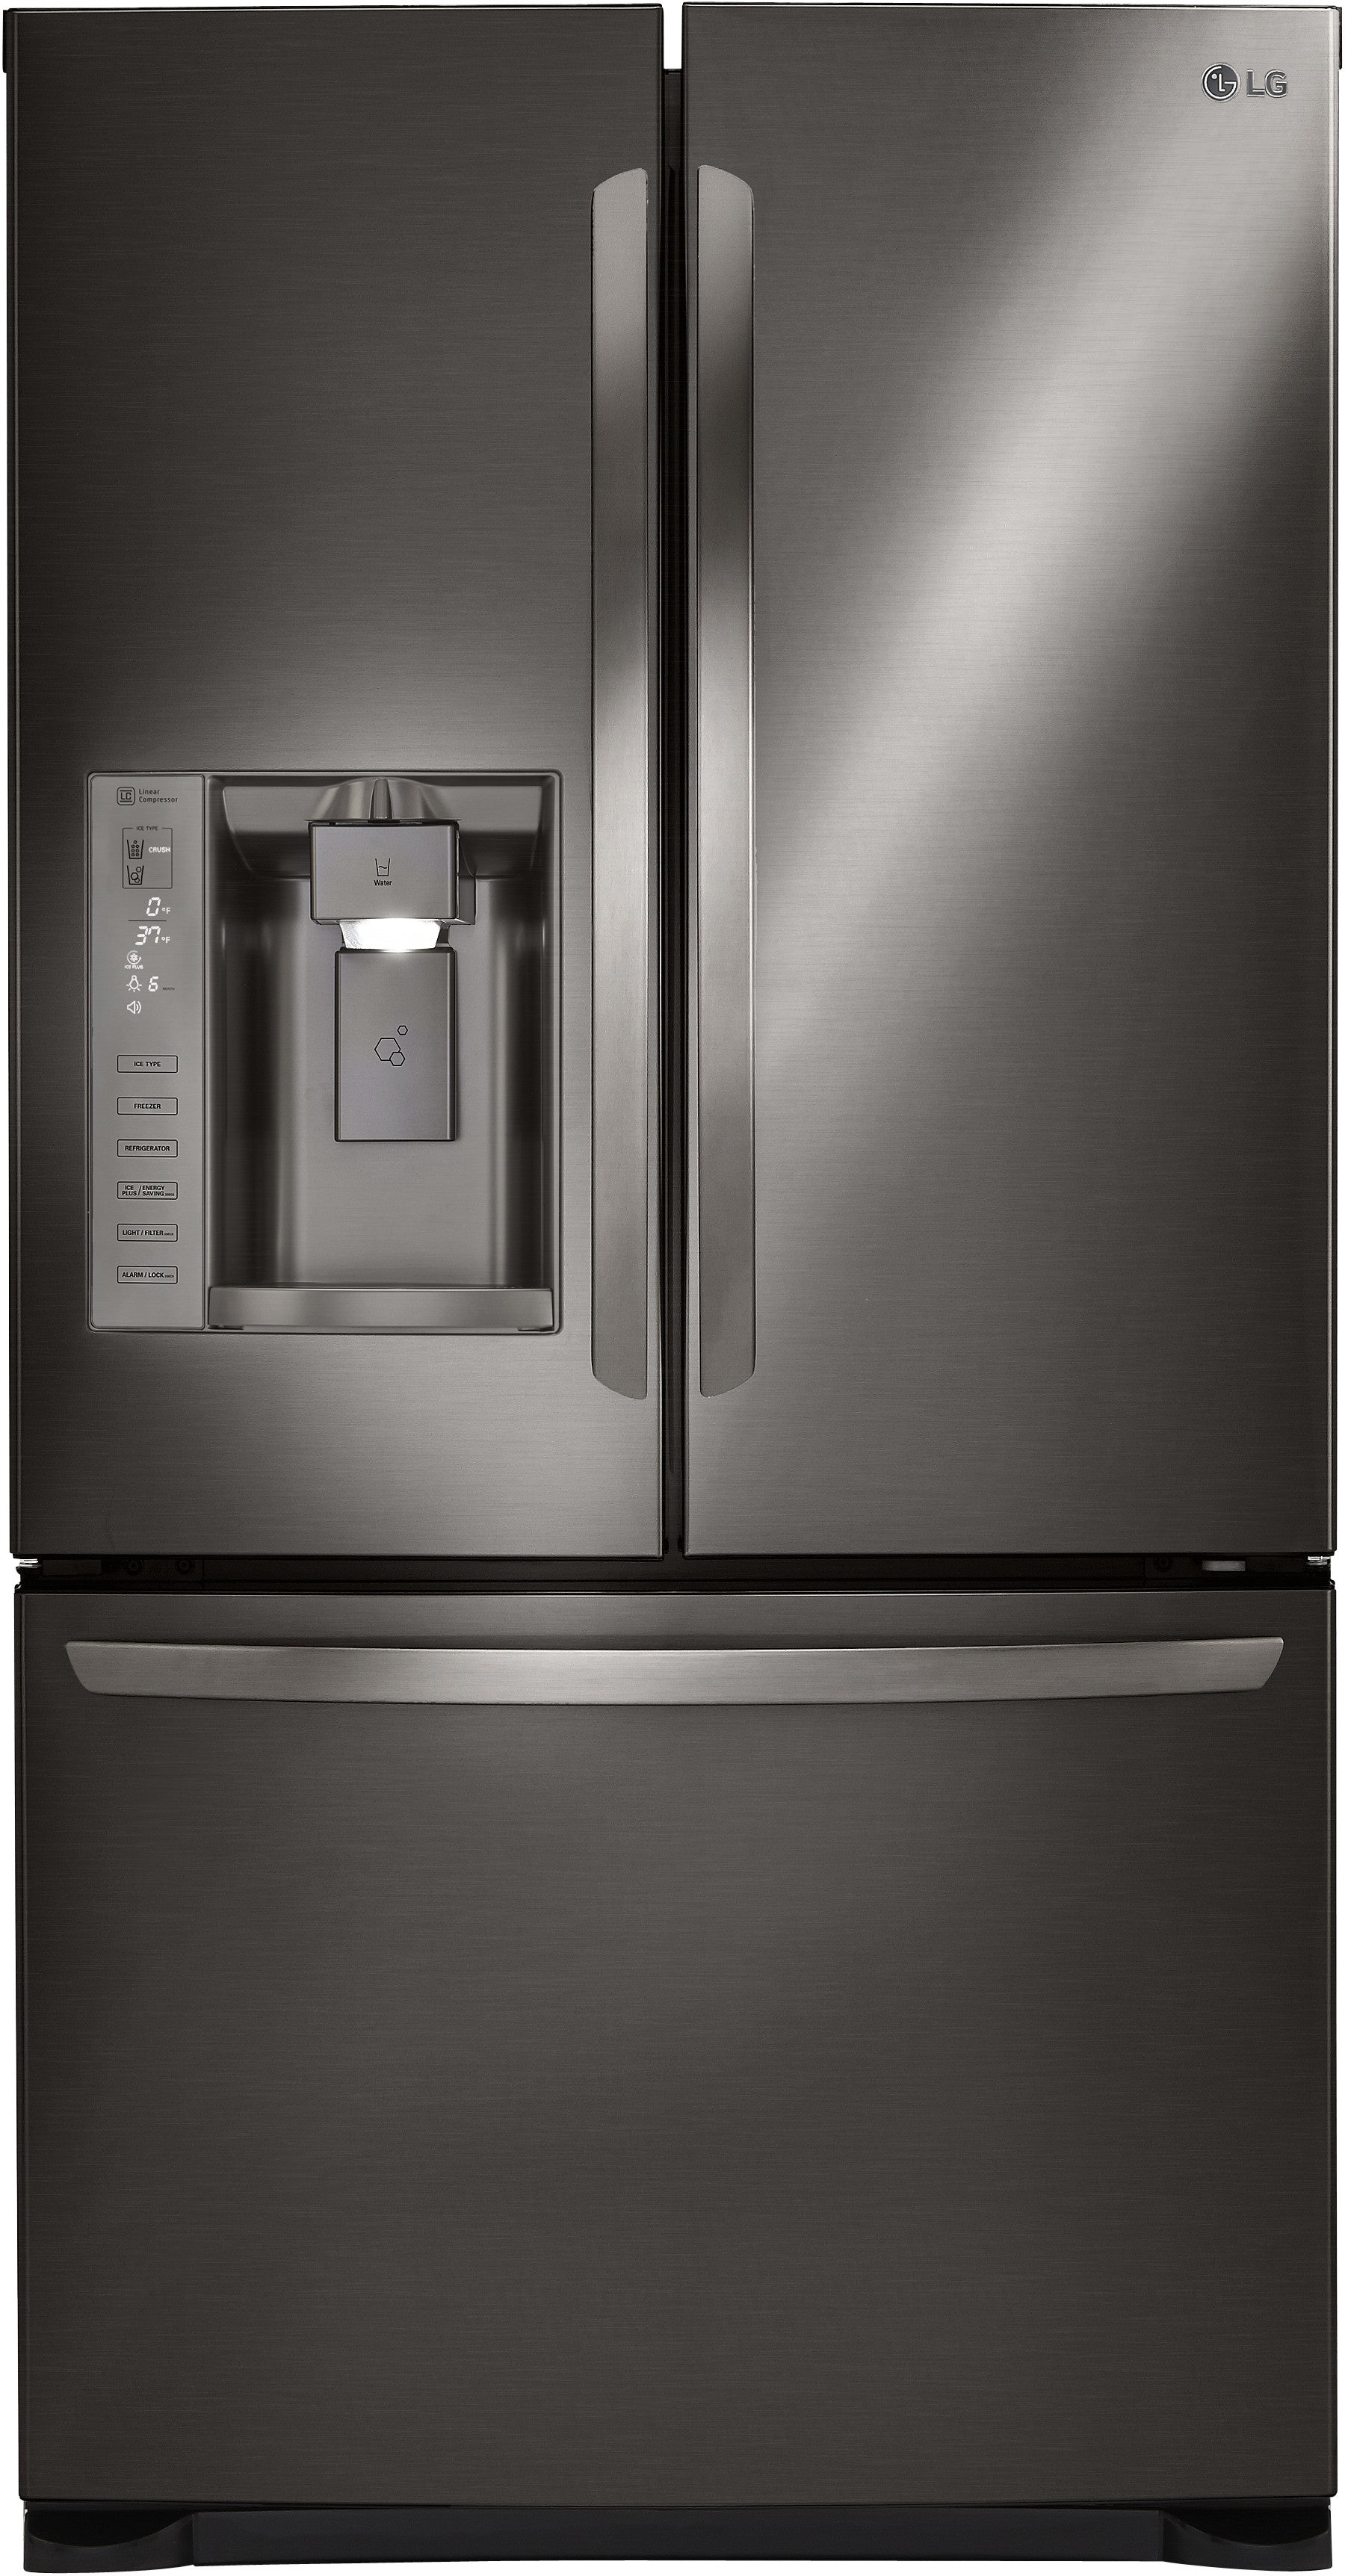 LG LFXS24626D 36 Inch 24 cu. ft. French Door Refrigerator with Tall Ice & Water Dispense